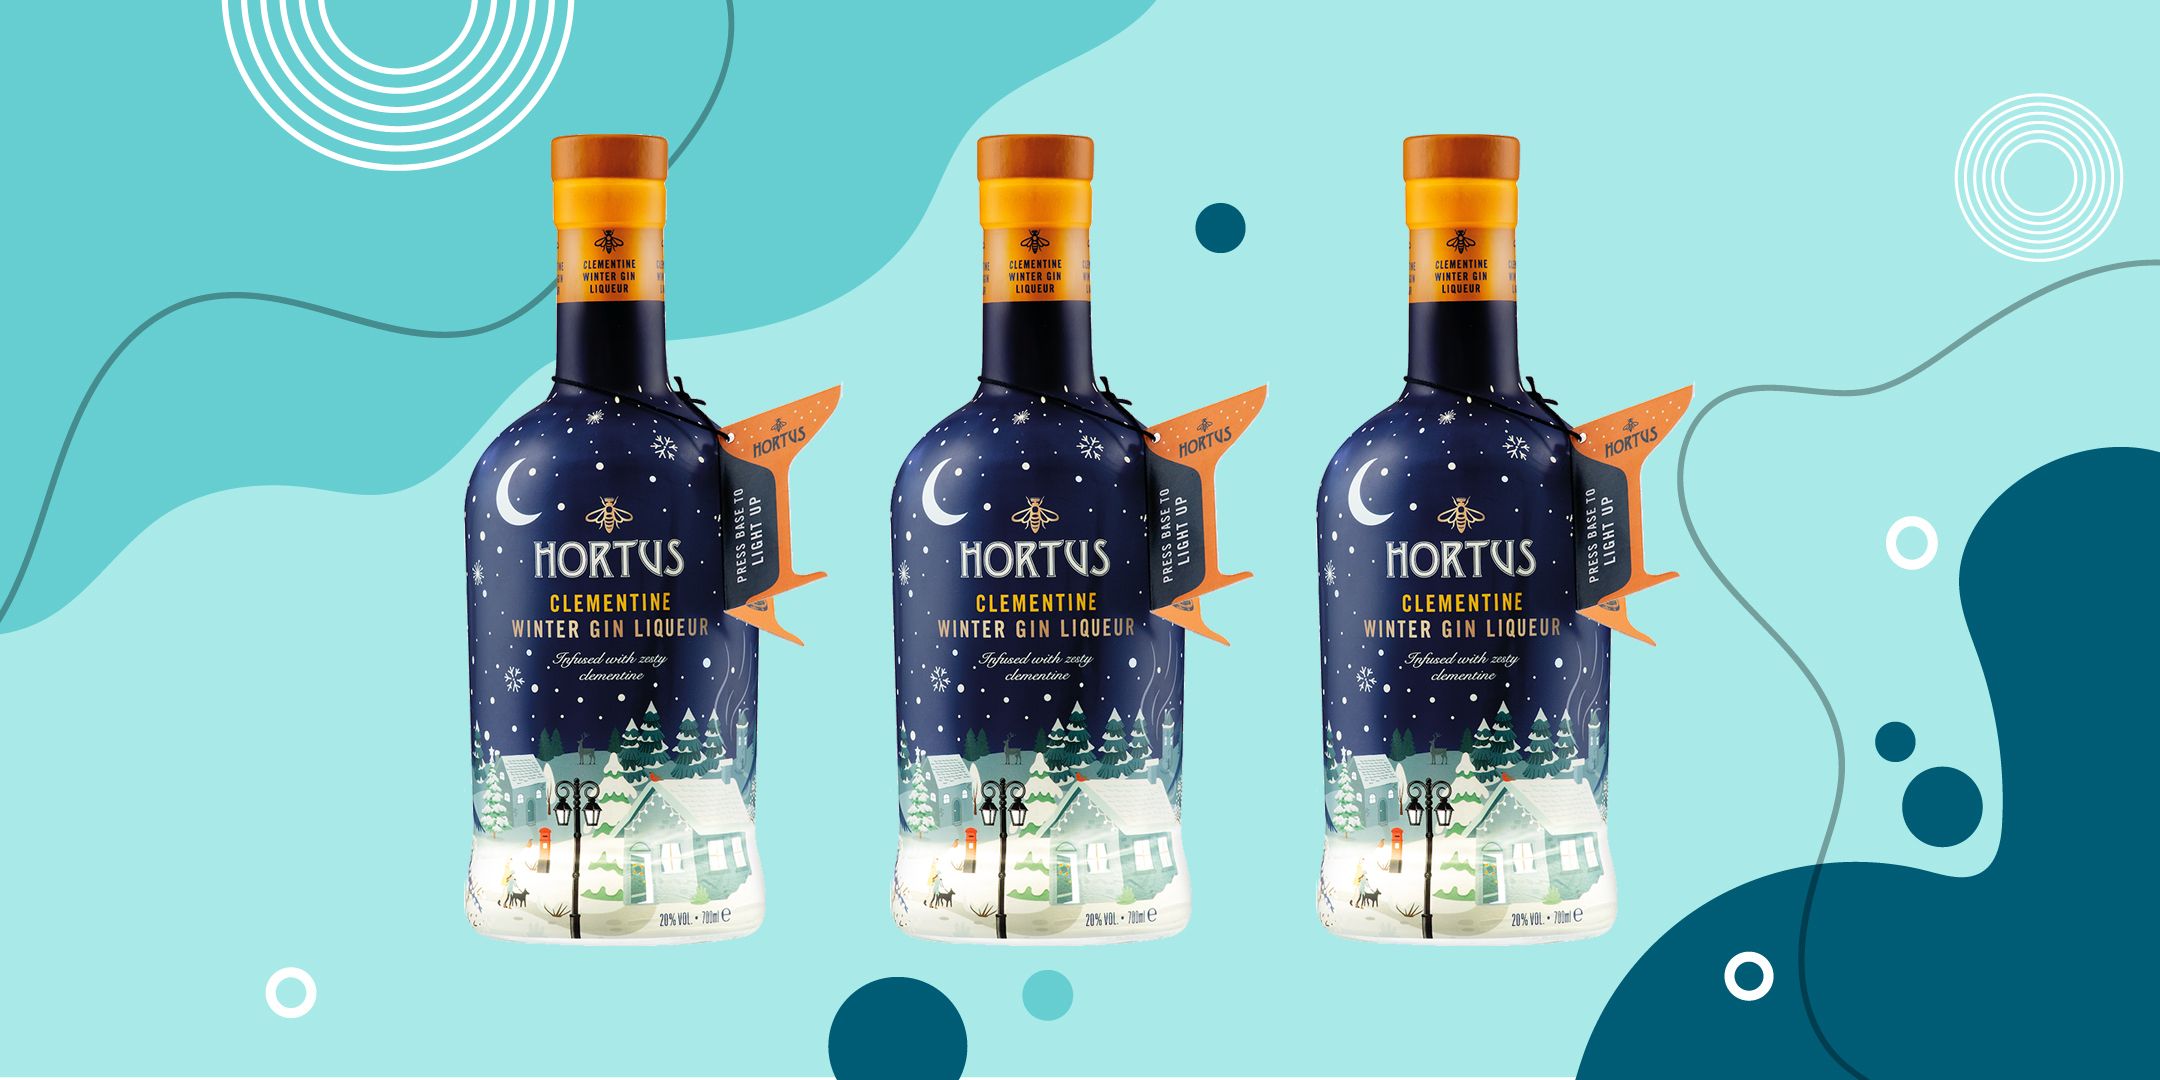 Lidl Launches A Gin For Christmas